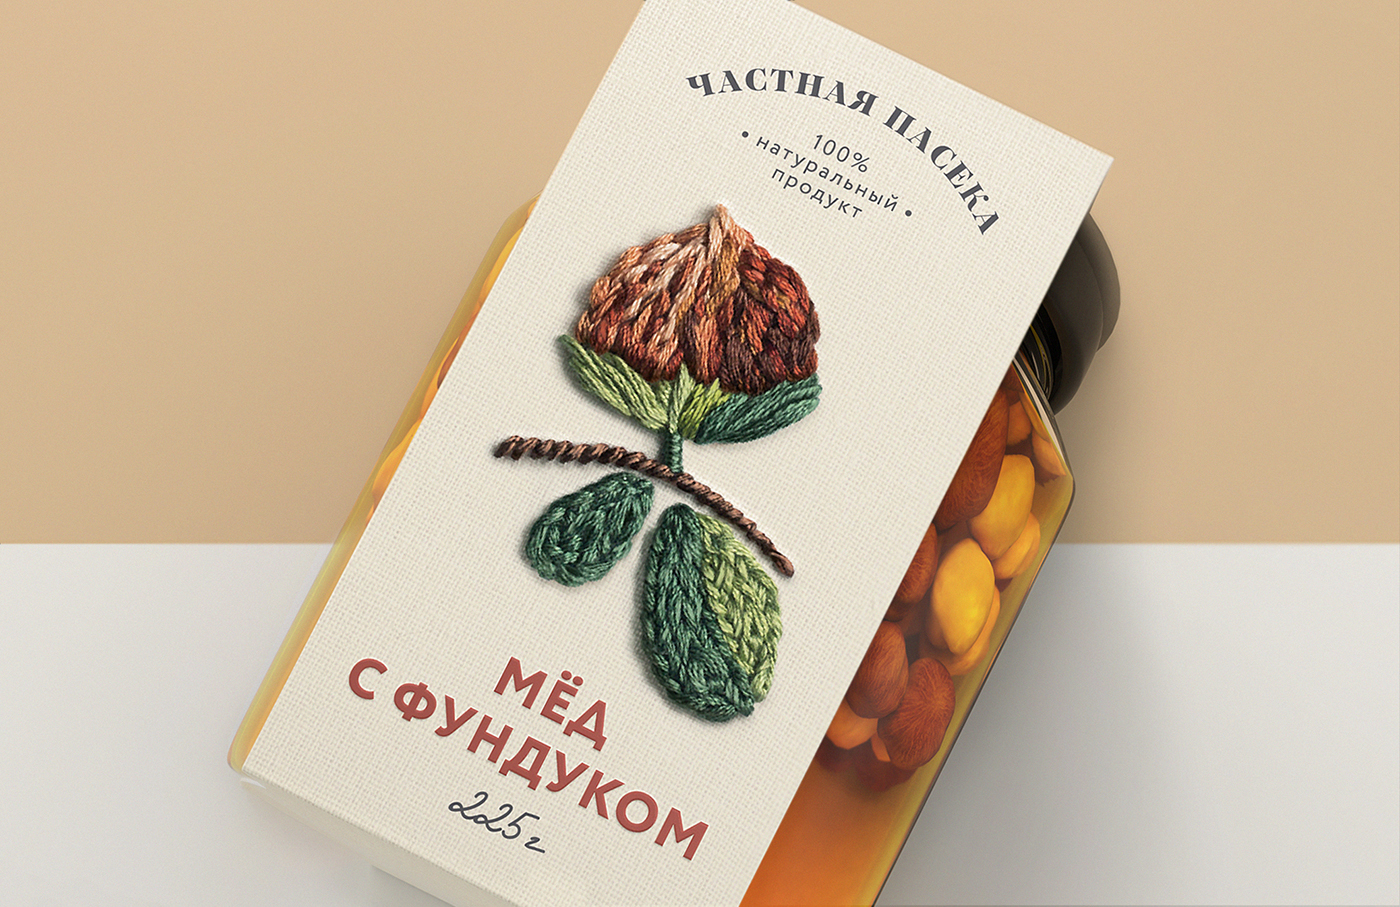 Packaging graphicdesign design handmade craft package brand product Food  ArtDirection